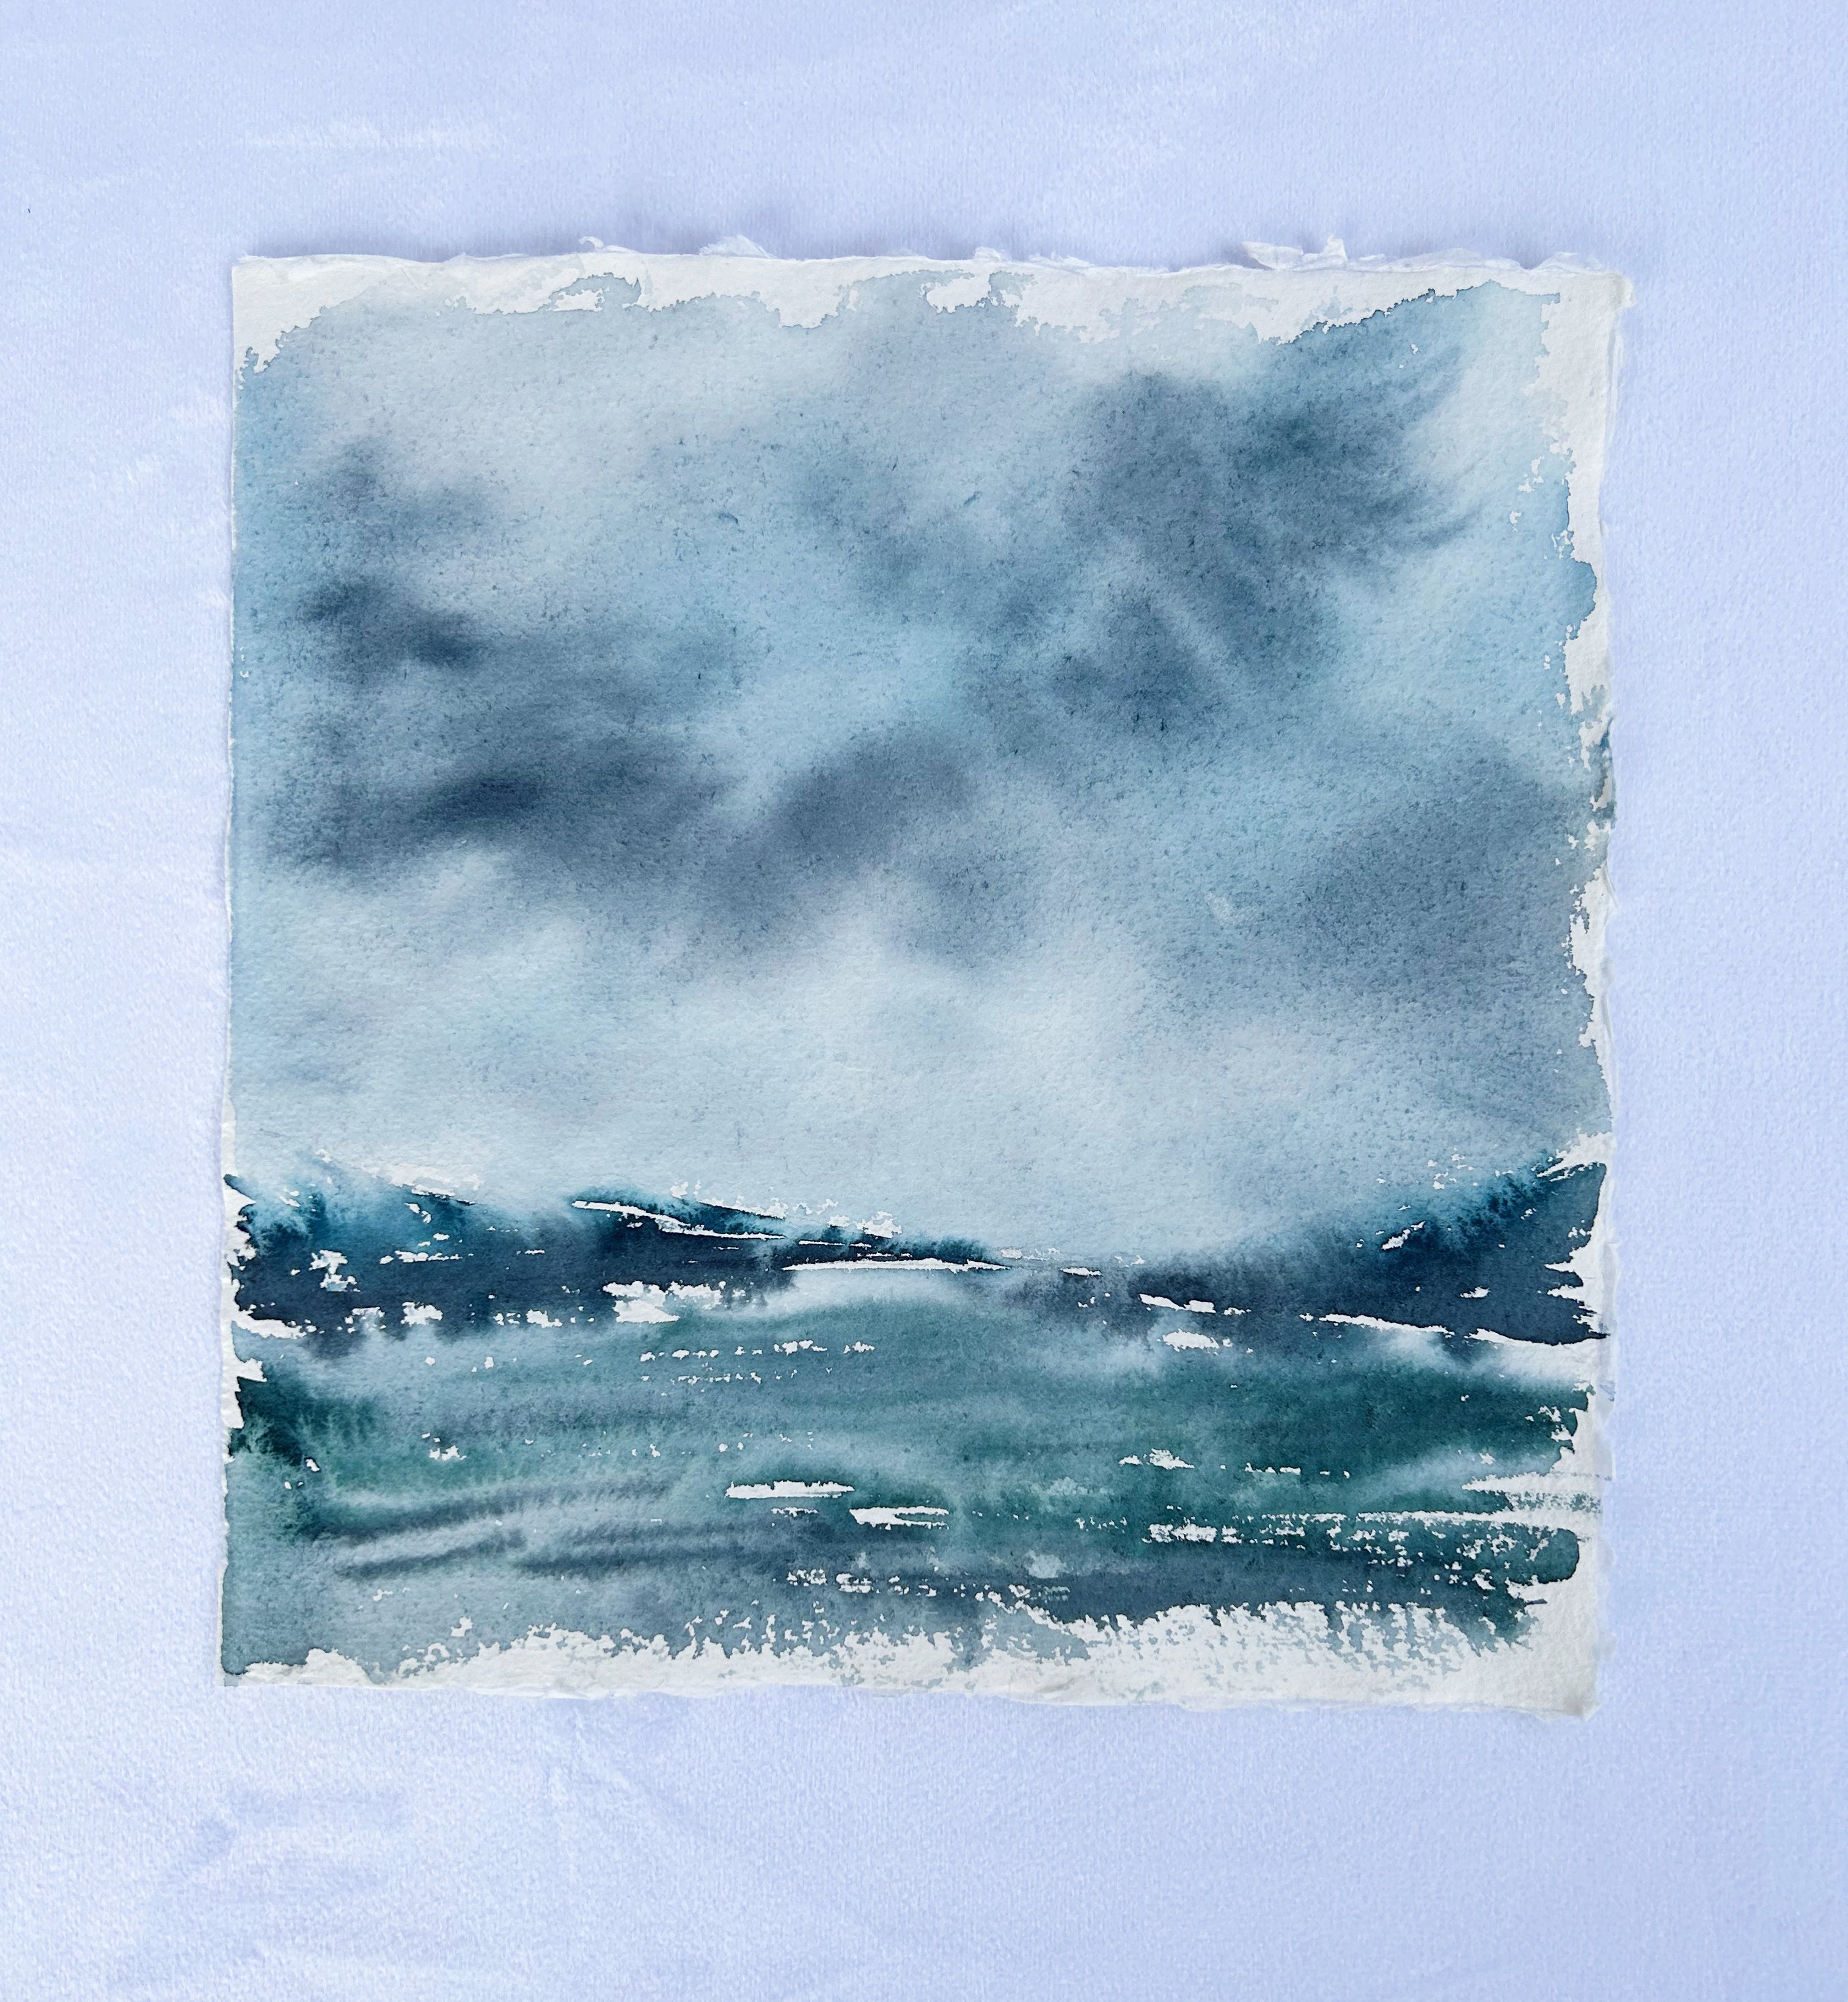 Obscured Horizons - Original Watercolor Painting